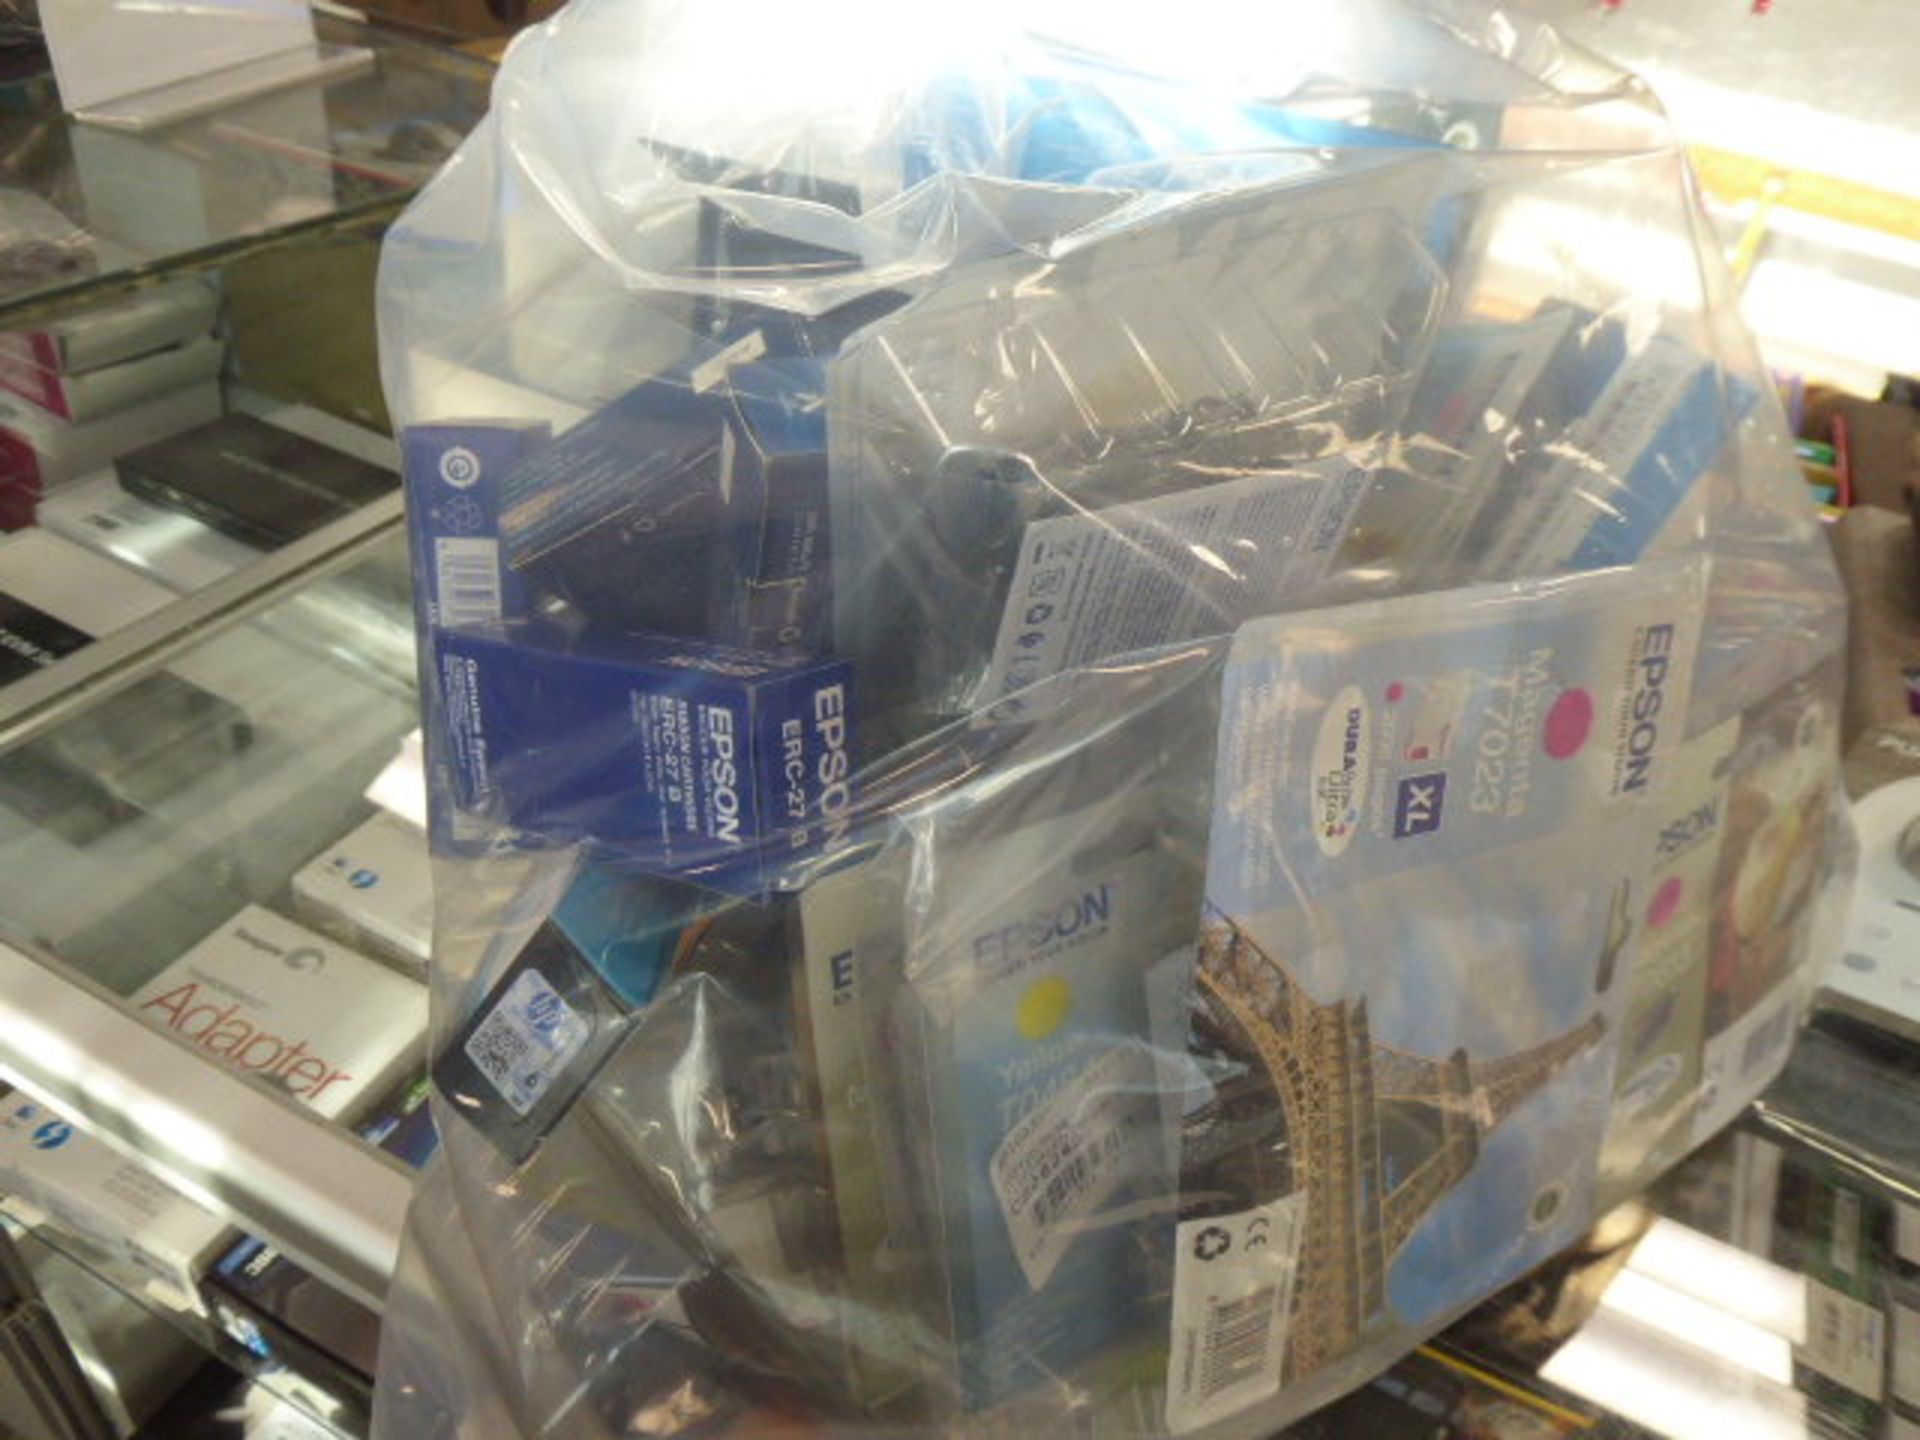 Bag containing a large qty of Epsom Brother and other branded and unbranded ink cartridges